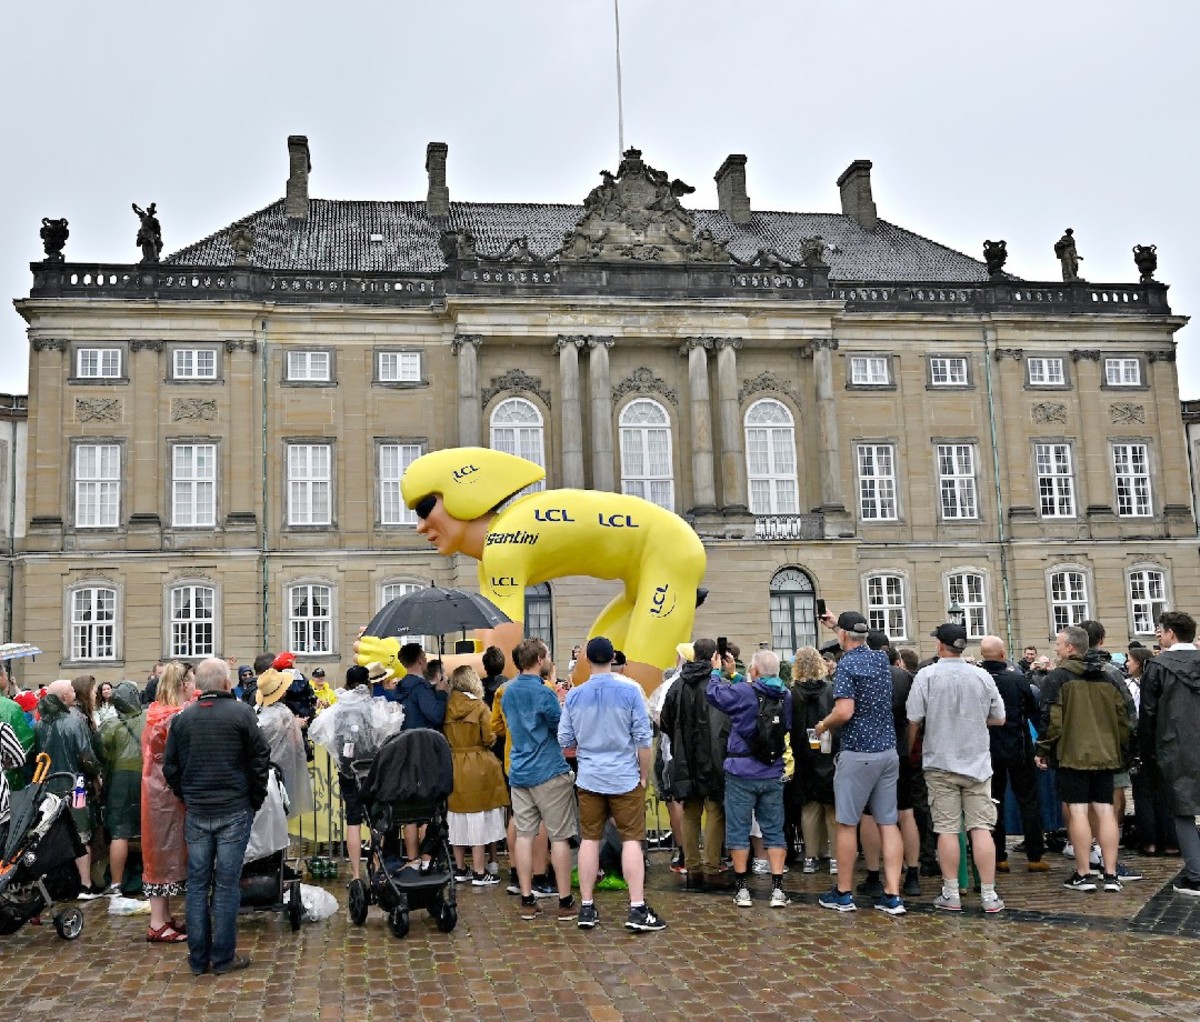 Crowd stands before a historic building in Denmark with a giant yellow-jerseyed blowup cycler